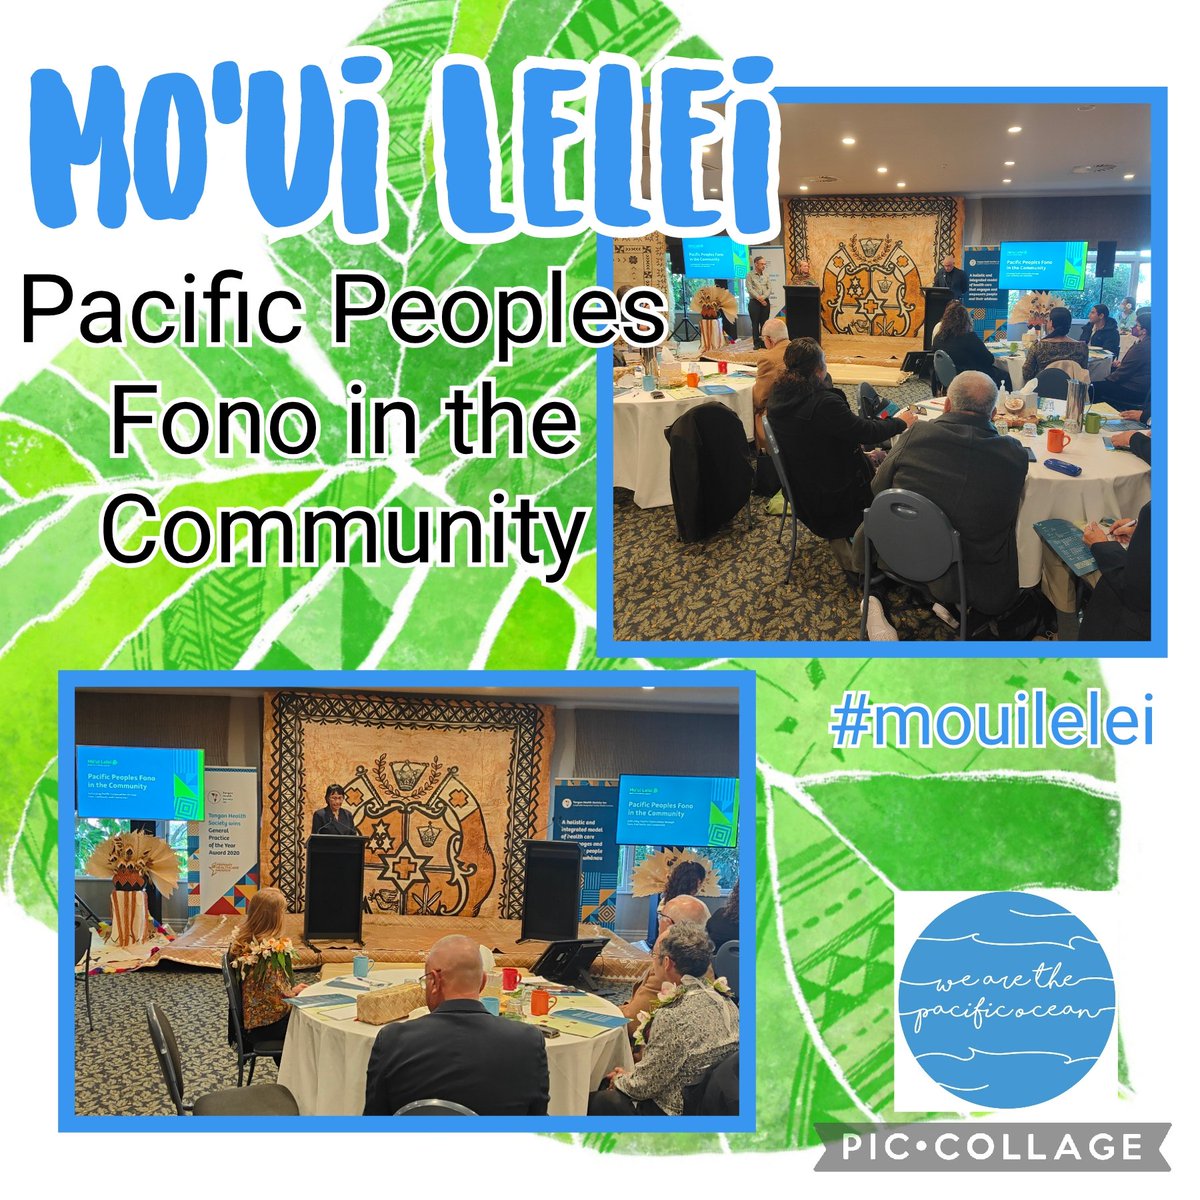 Welcome to #mouilelei Pacific Peoples Fono in the Community! This year's theme is Activating Pacific Communities through Care, Continuity and Connection. Join us on Twitter & other social media by following the above hashtag. 🇹🇴🇼🇸🇫🇯🇰🇮🇨🇰🇹🇻🇹🇰🇳🇺🇳🇿
#pacifichealth #pacific